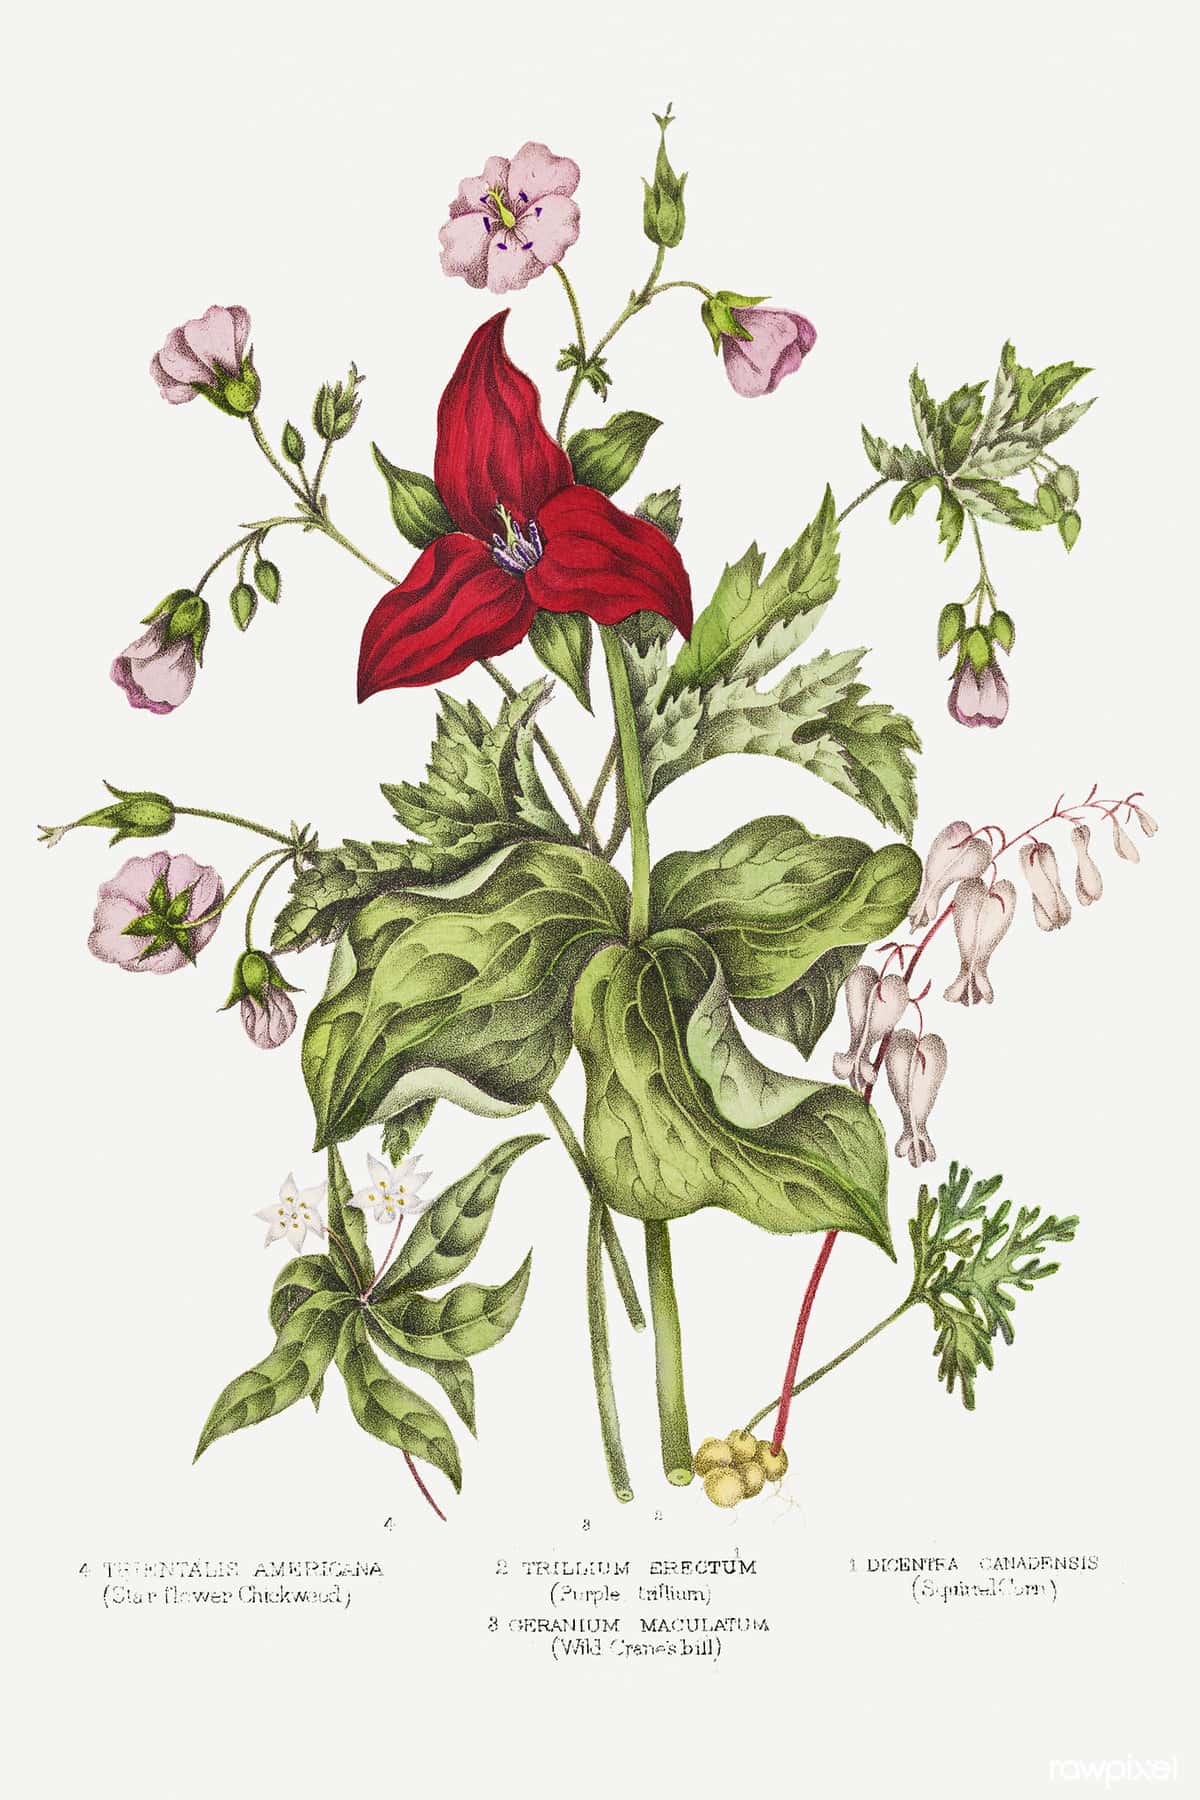 An illustration of a red flower and other plants.